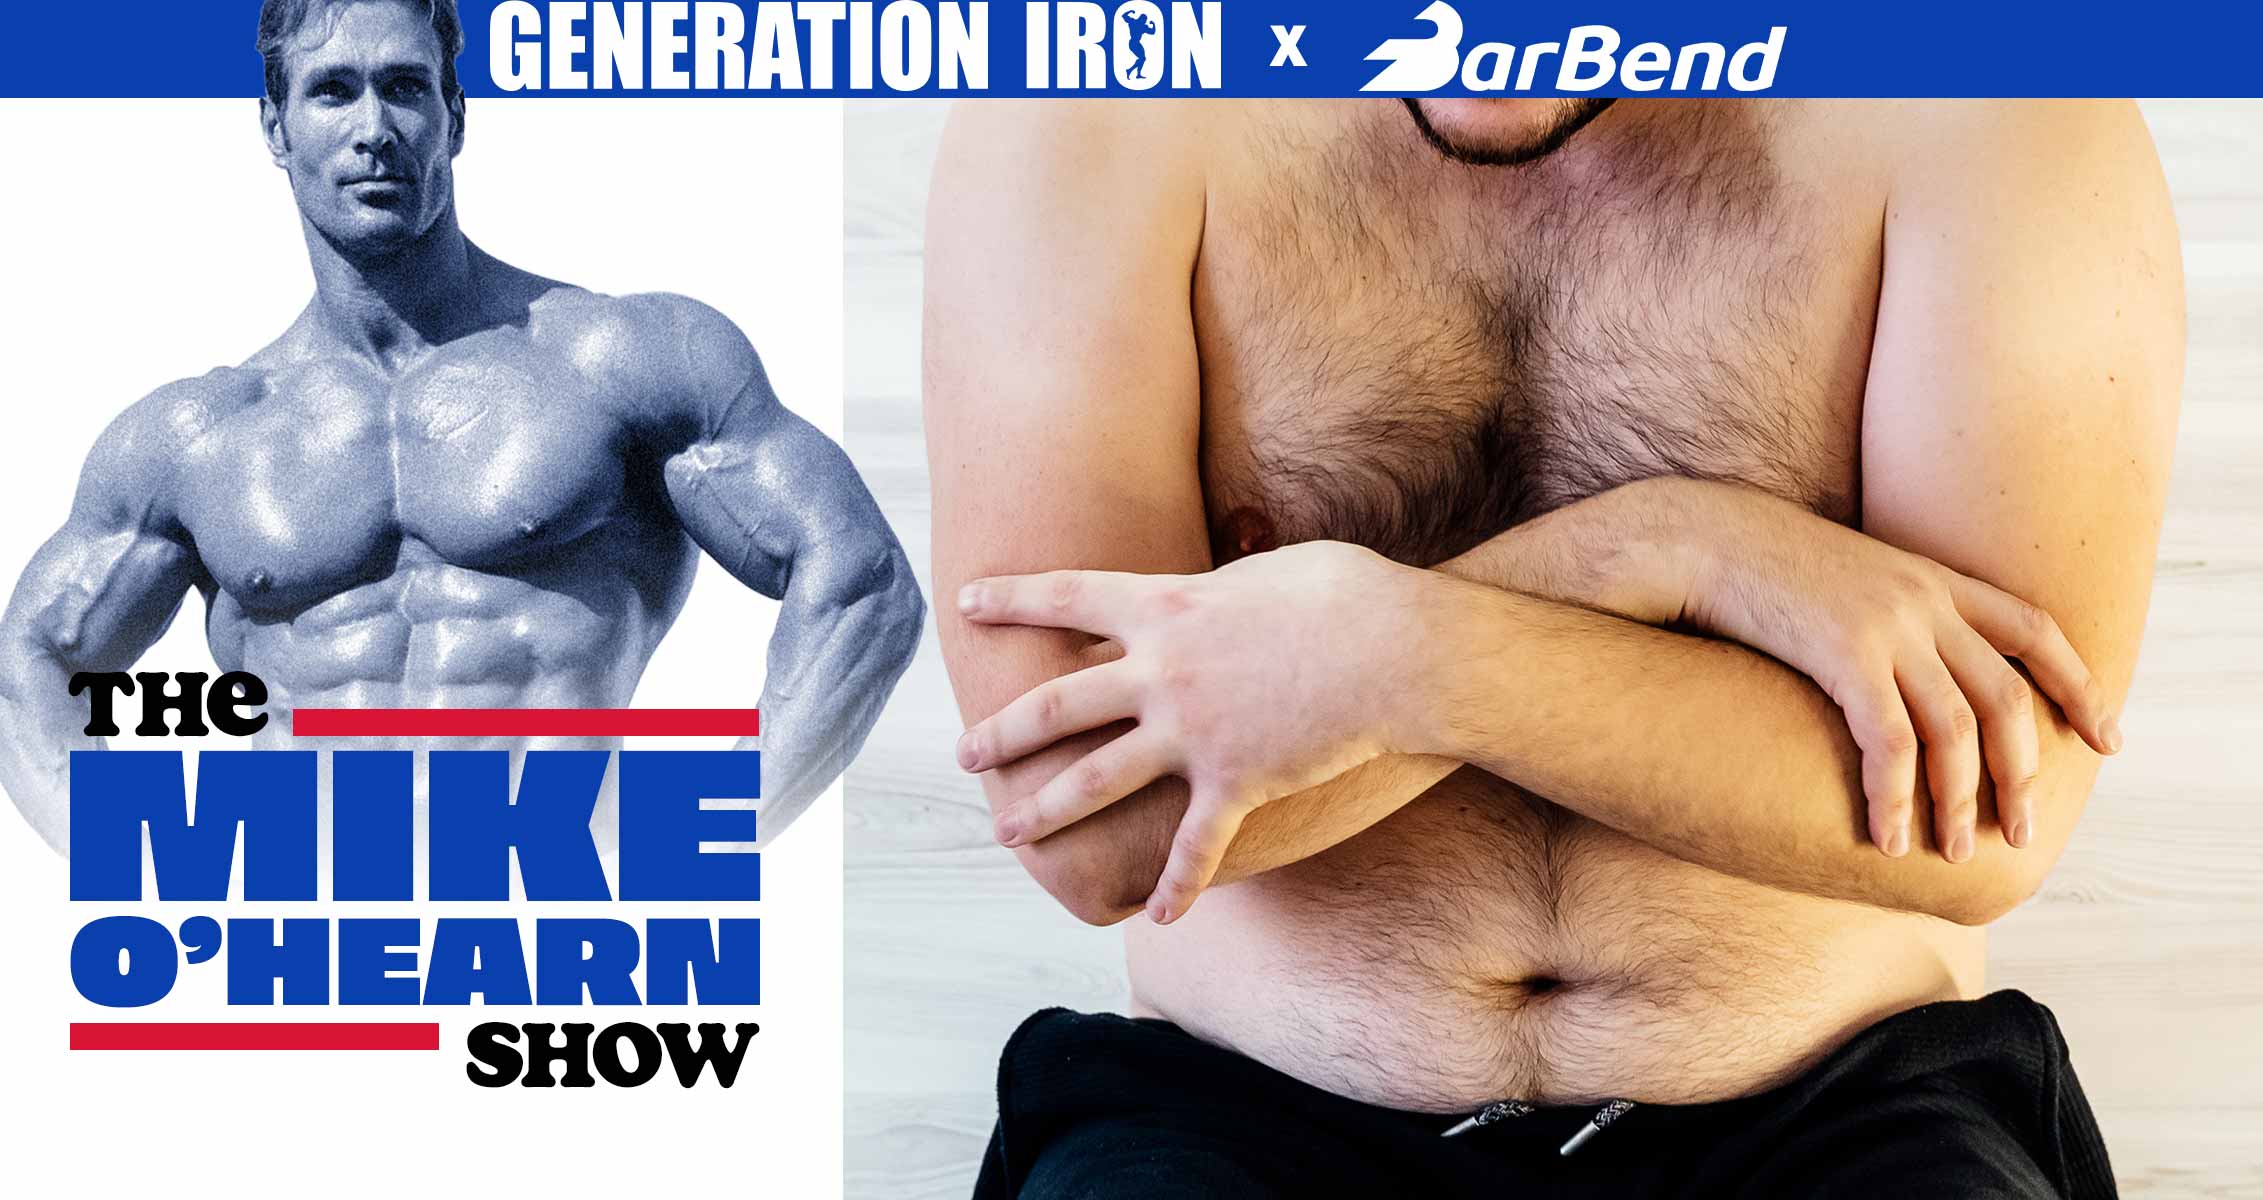 The Mike O’Hearn Show: “If You’re Not In Great Shape In Your 20s… I’m Done With You.”